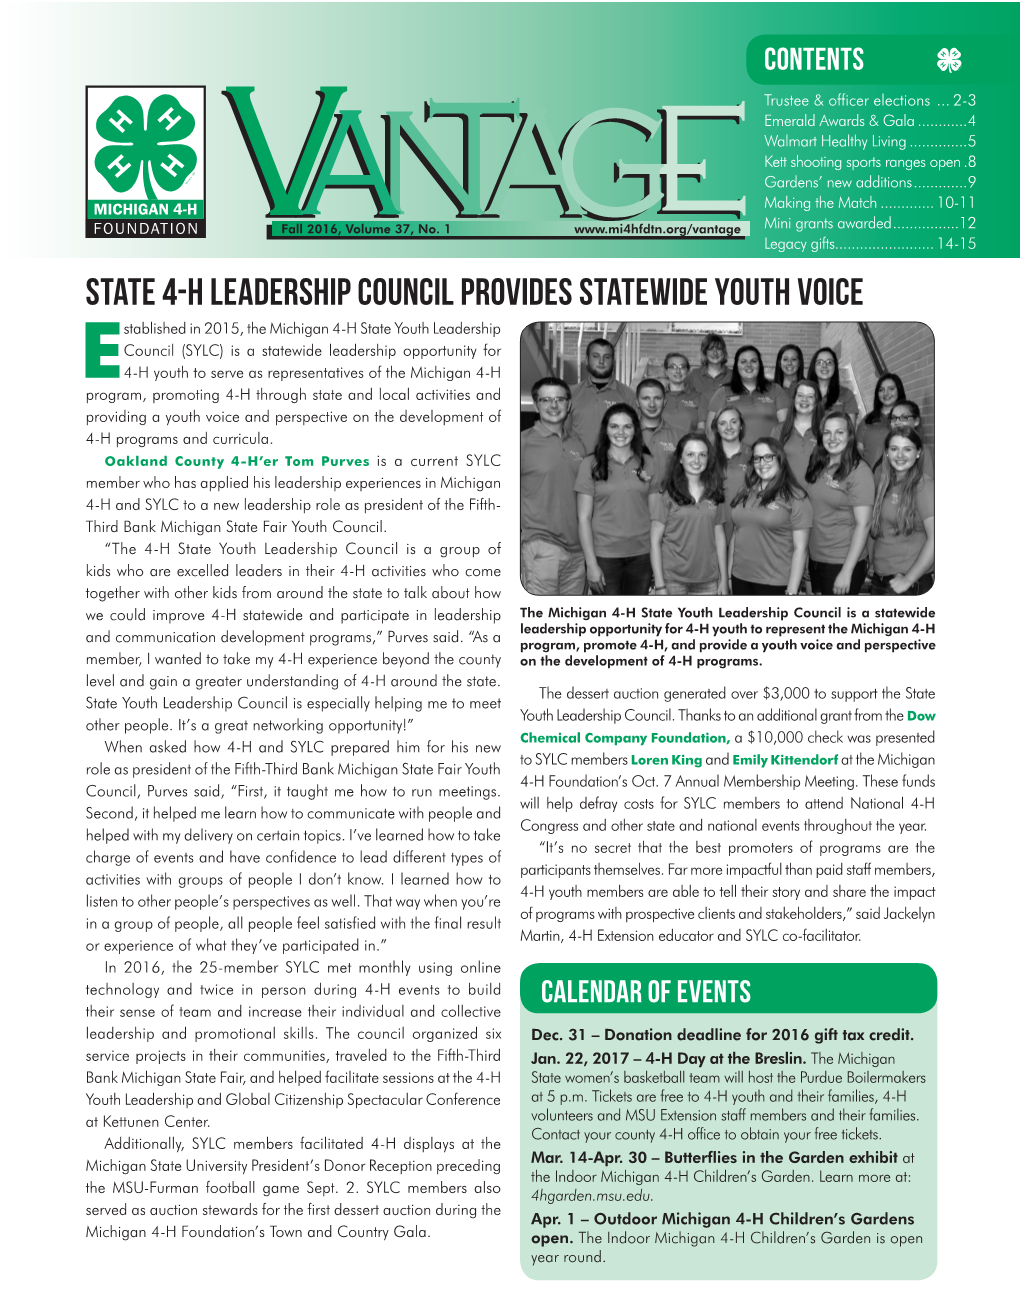 State 4-H Leadership Council Provides Statewide Youth Voice